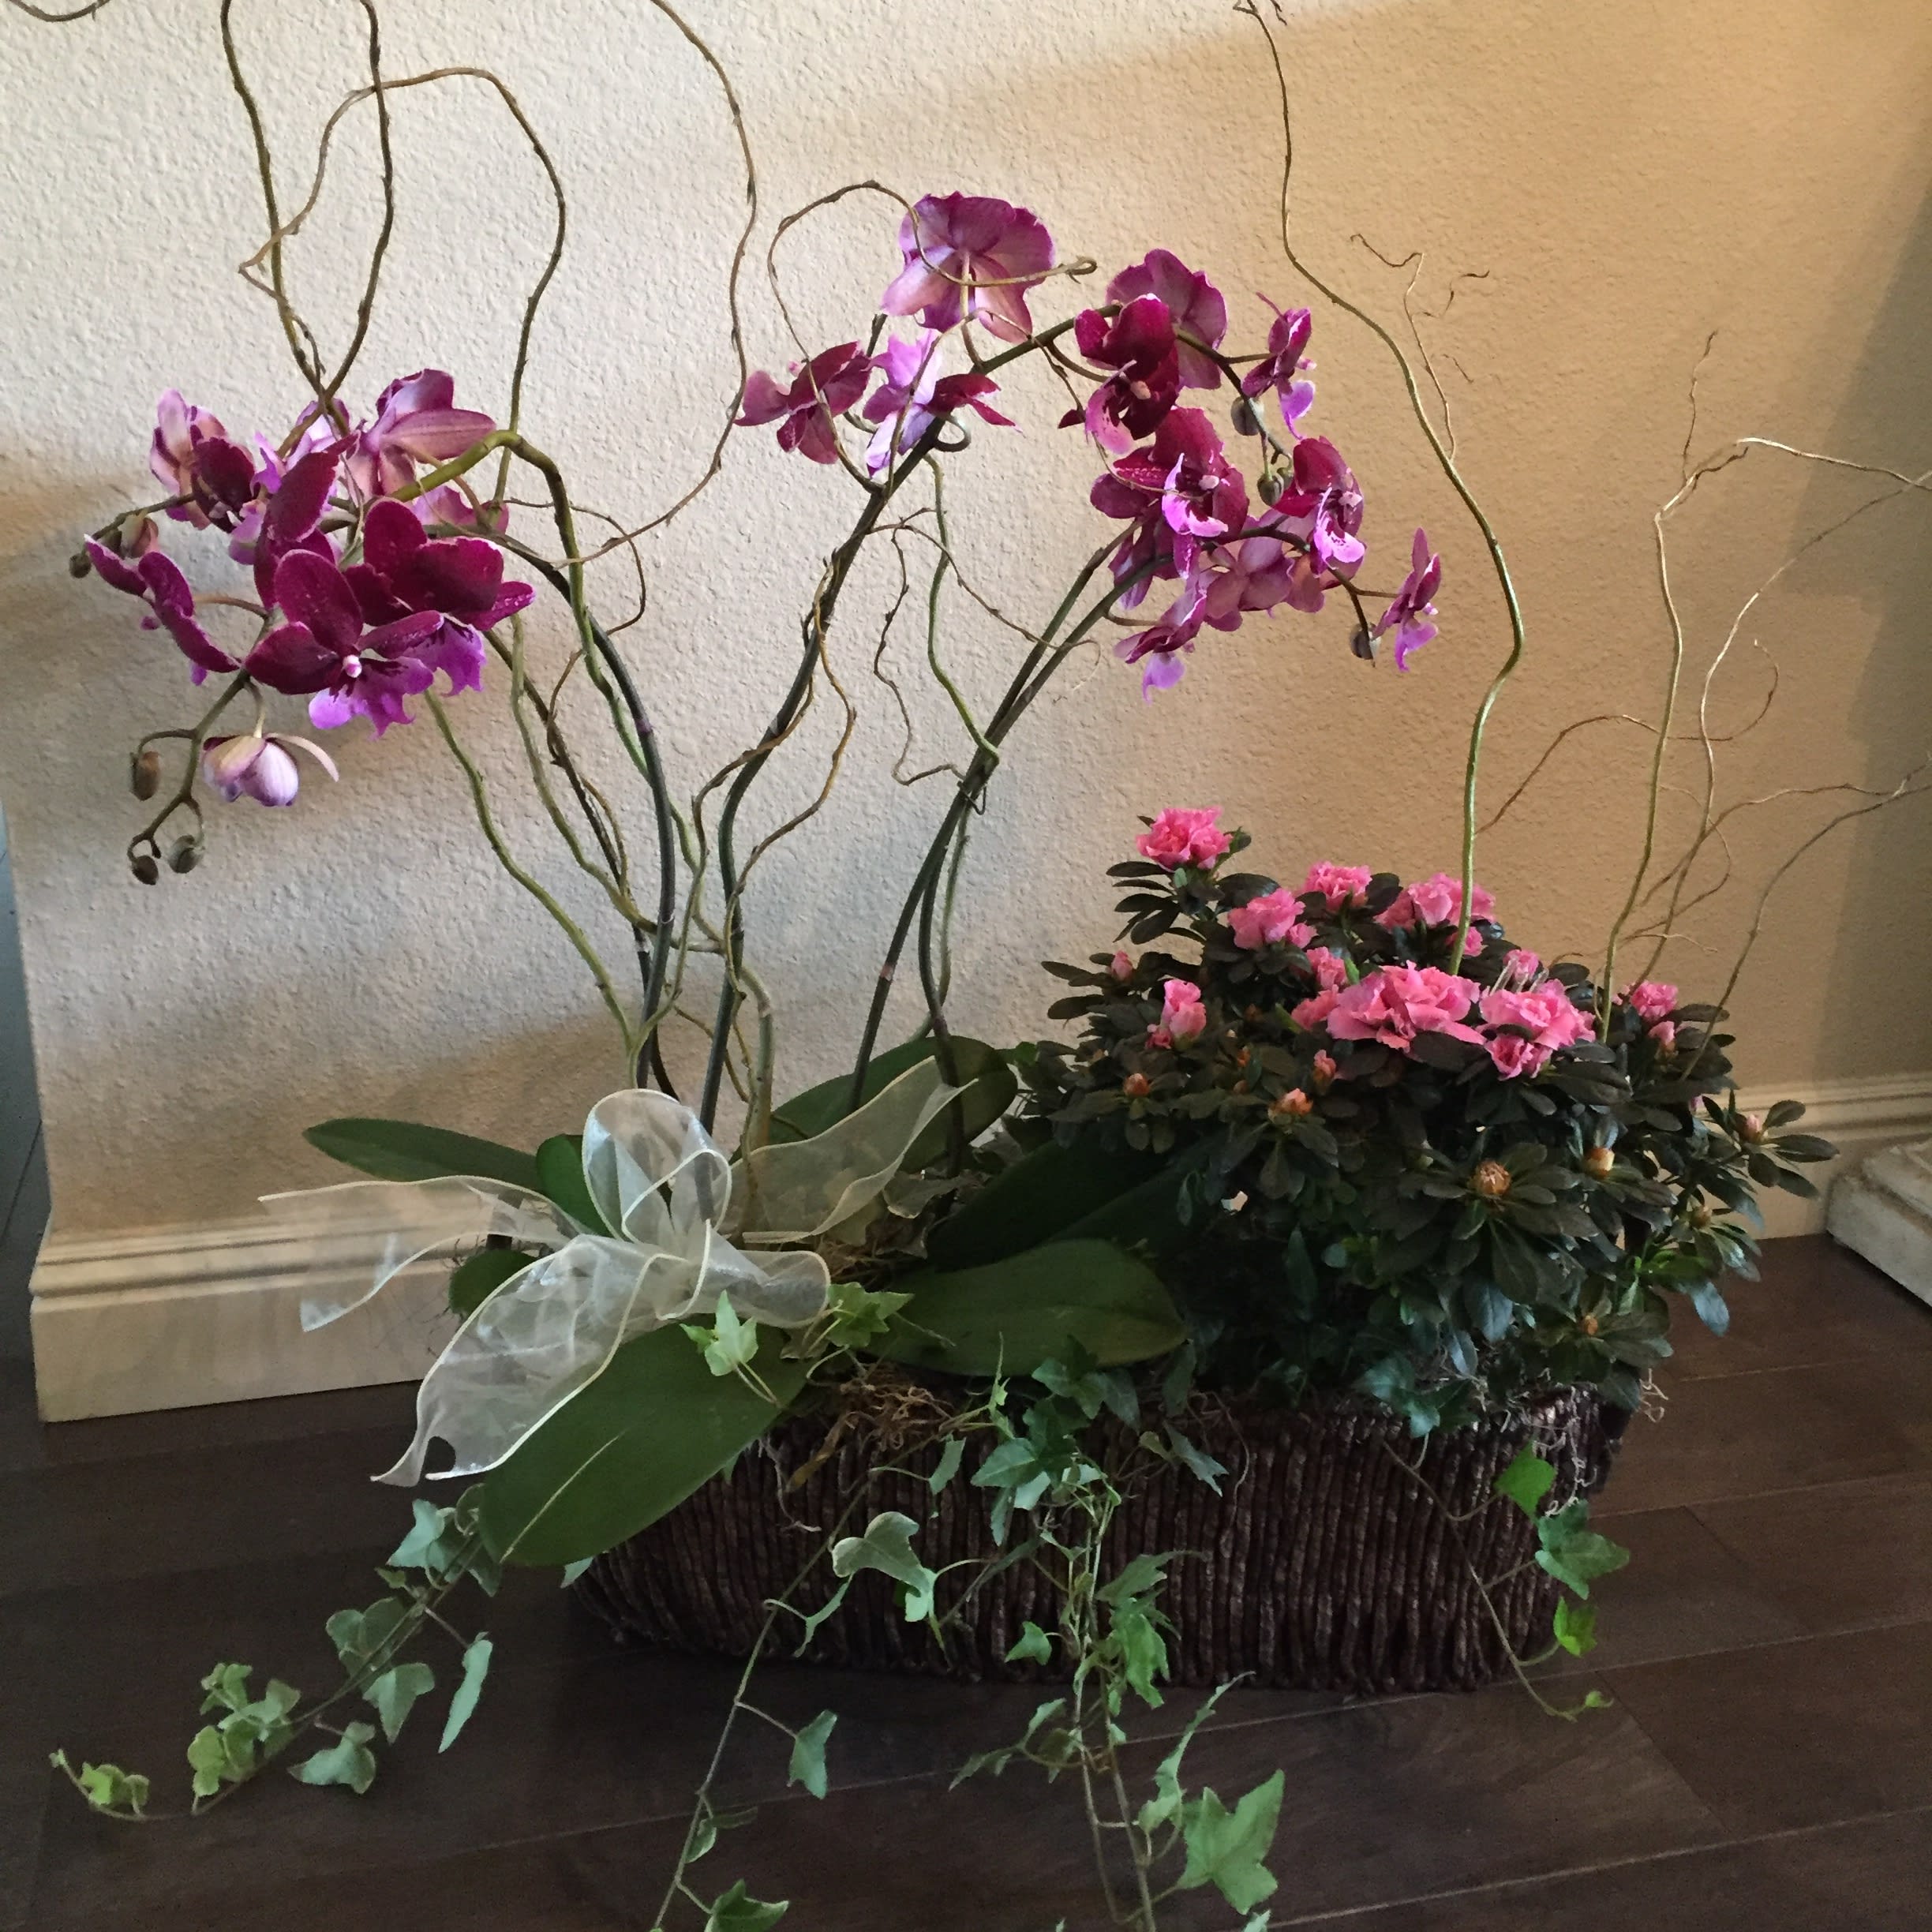 Orchid Garden Basket - Potted orchids and an assortment of blooming and green garden plants arranged in a basket and lined for easy care. Each one is unique. Orders are filled to value based on market availability of colors and varieties. A beautiful, long-lasting gift. 